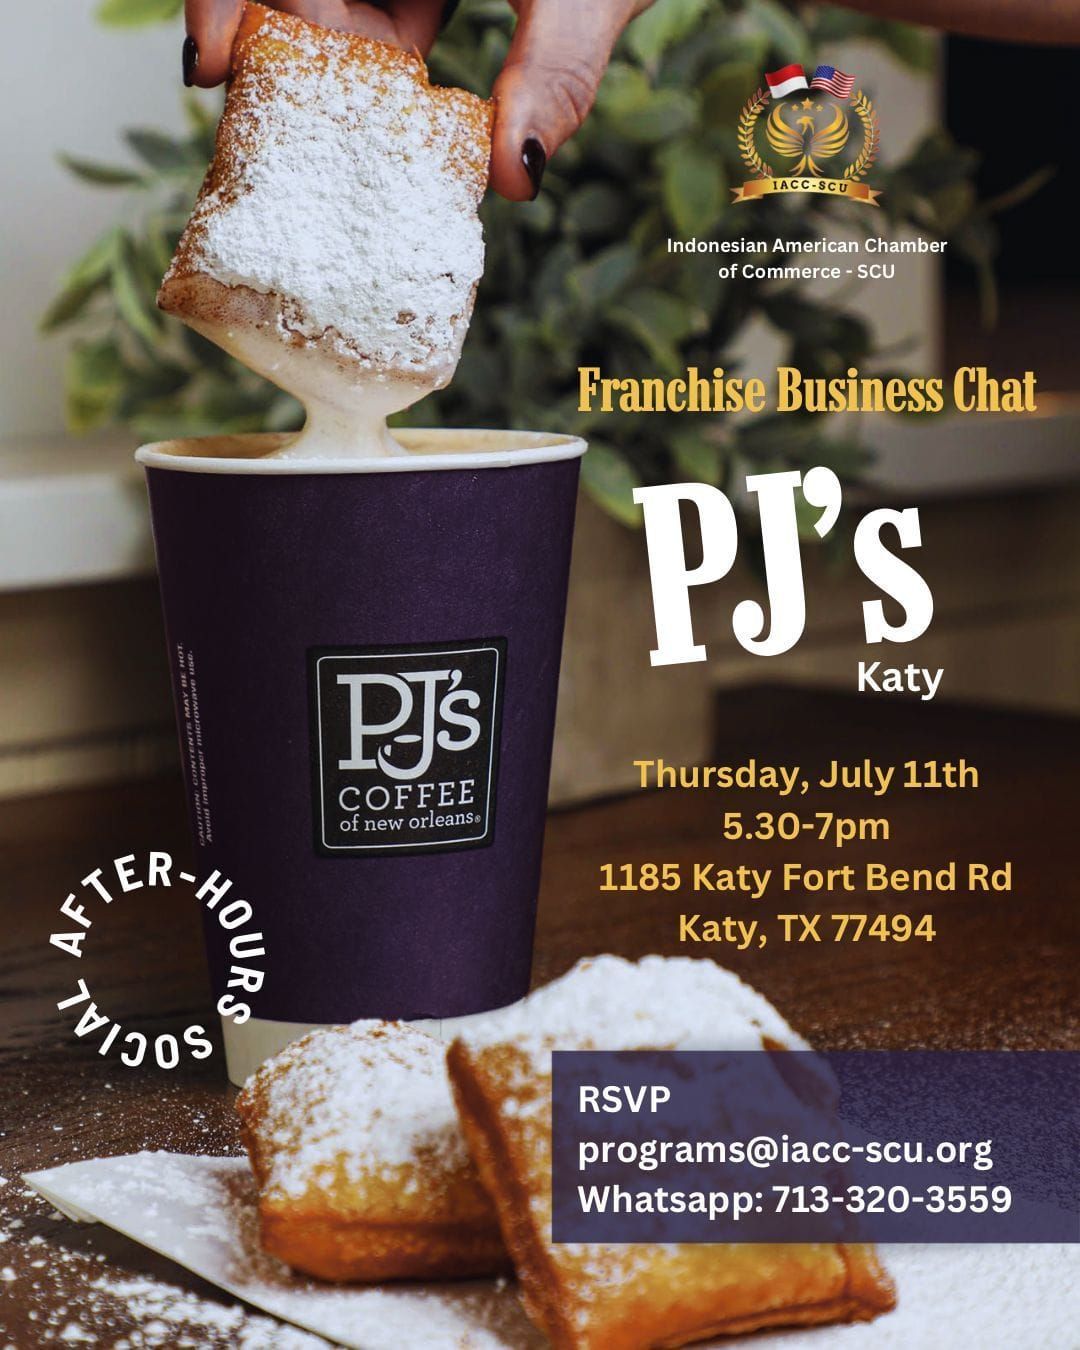 PJ's Coffee Business Chat Indonesian